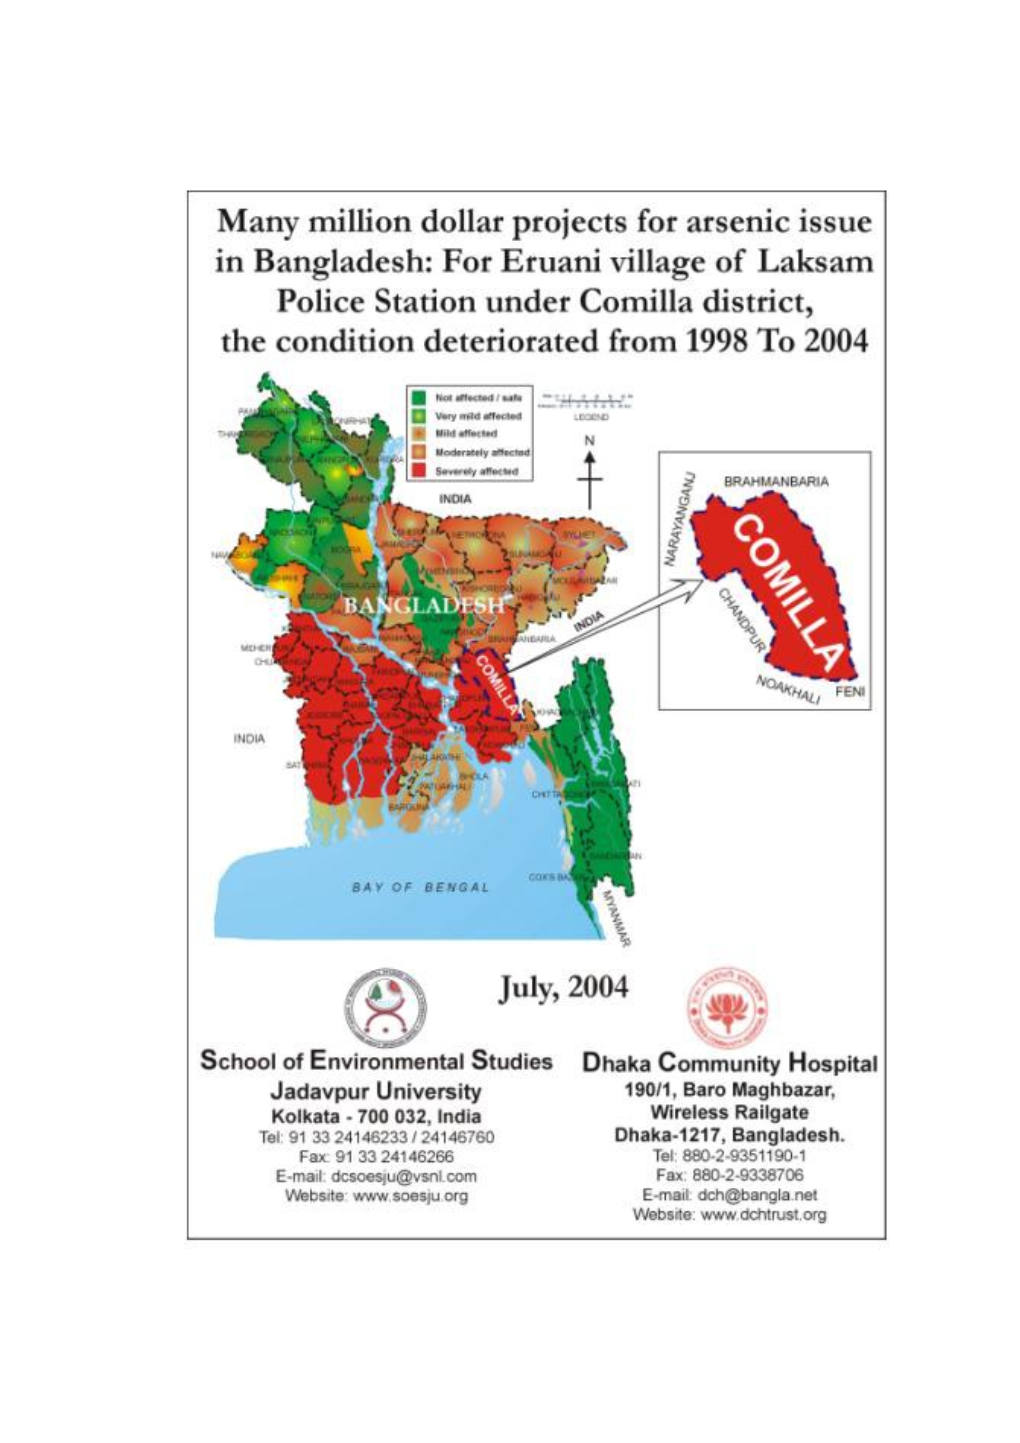 Many Million Dollar Projects for Arsenic Issue in Bangladesh . to 2004